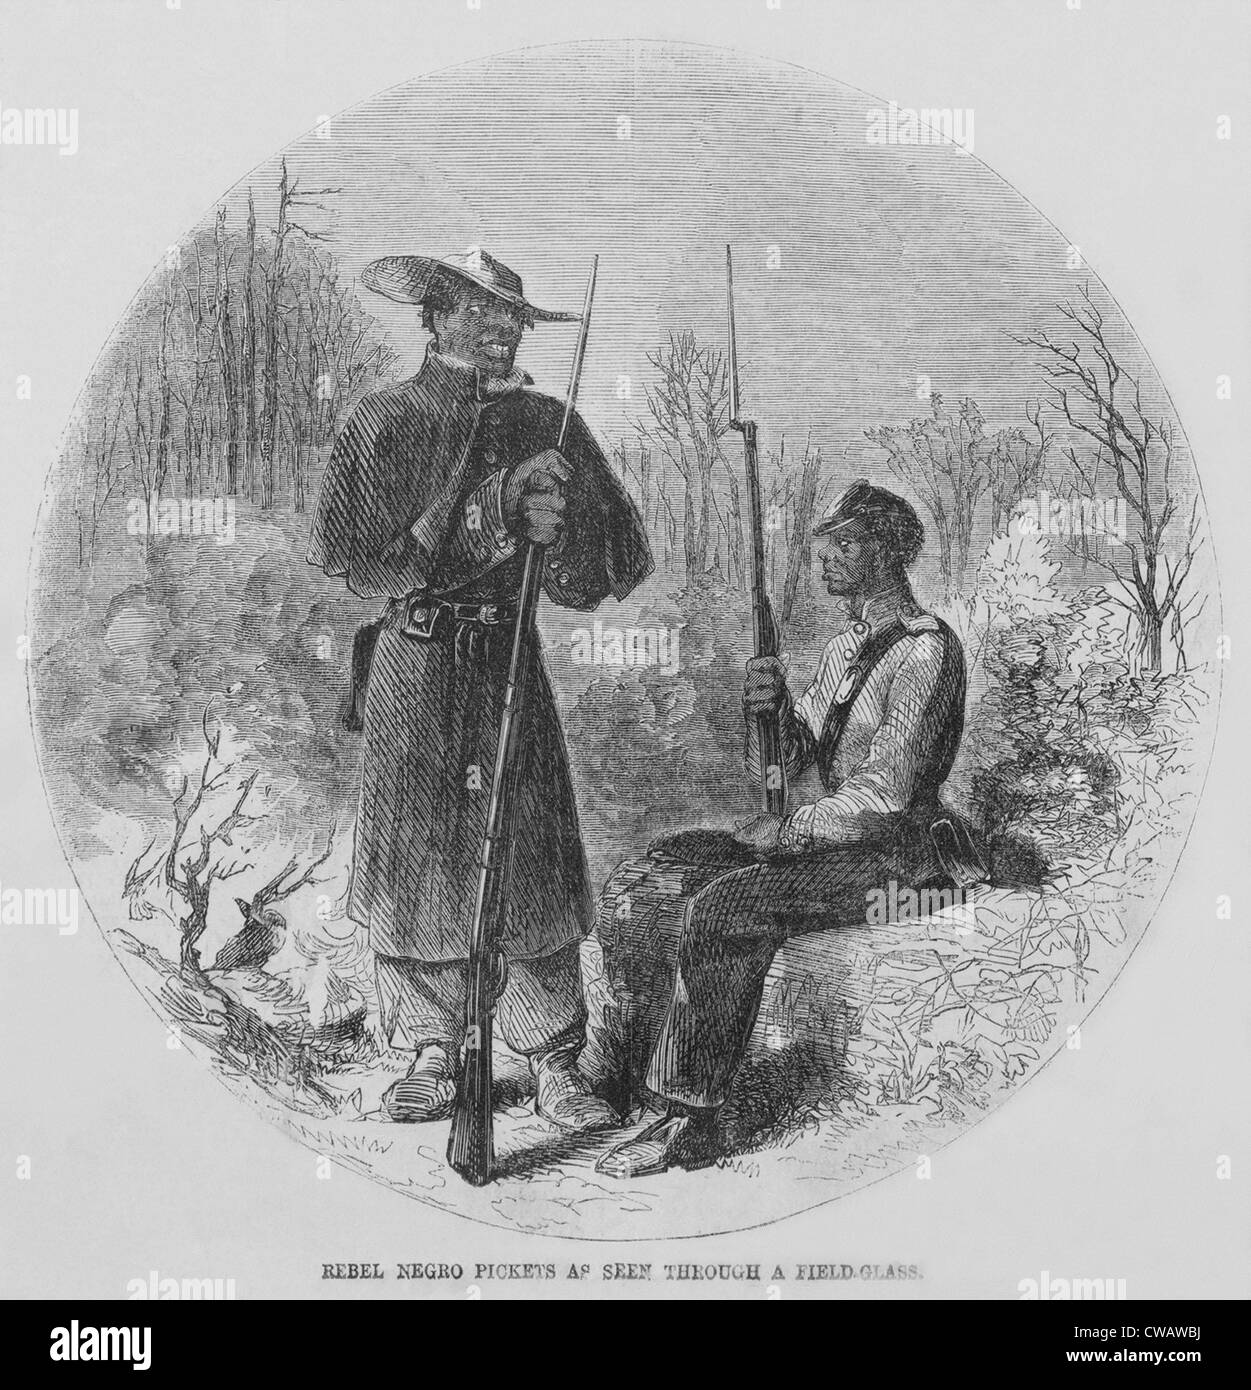 Fully armed Confederate African American pickets as seen through a Union officer's field-glass, while on outpost duty at Stock Photo